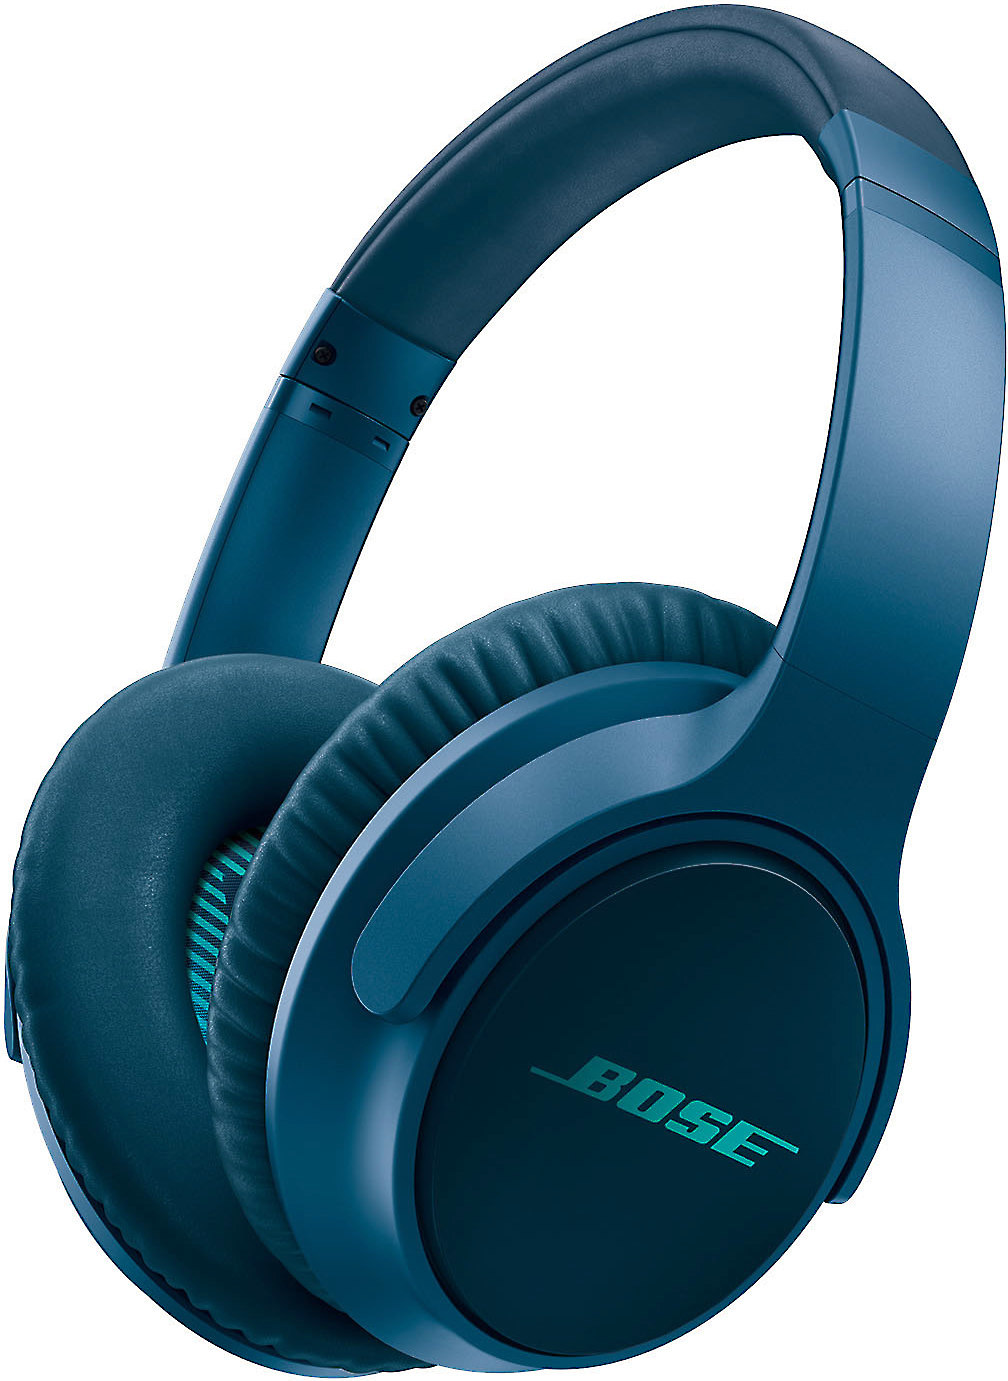 Bose Soundtrue Around Ear Headphones Ii Navy Blue For Music And Calls With Apple Devices At Crutchfield